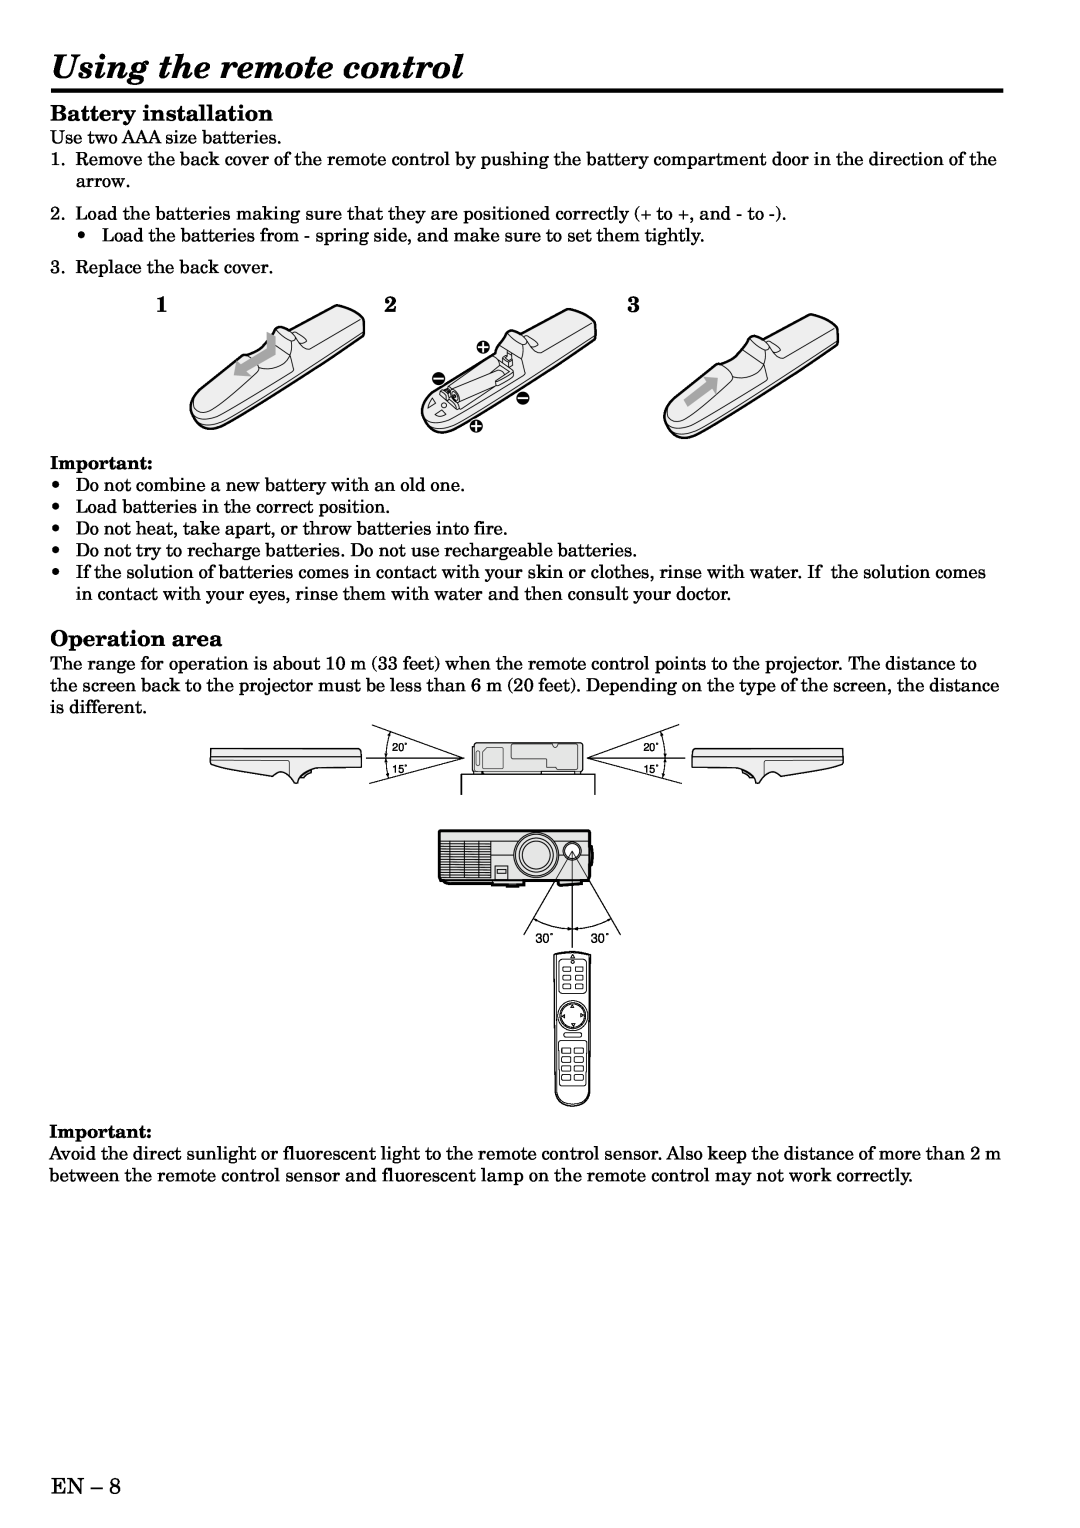 Mitsubishi Electronics X80 user manual Using the remote control, Battery installation, Operation area 